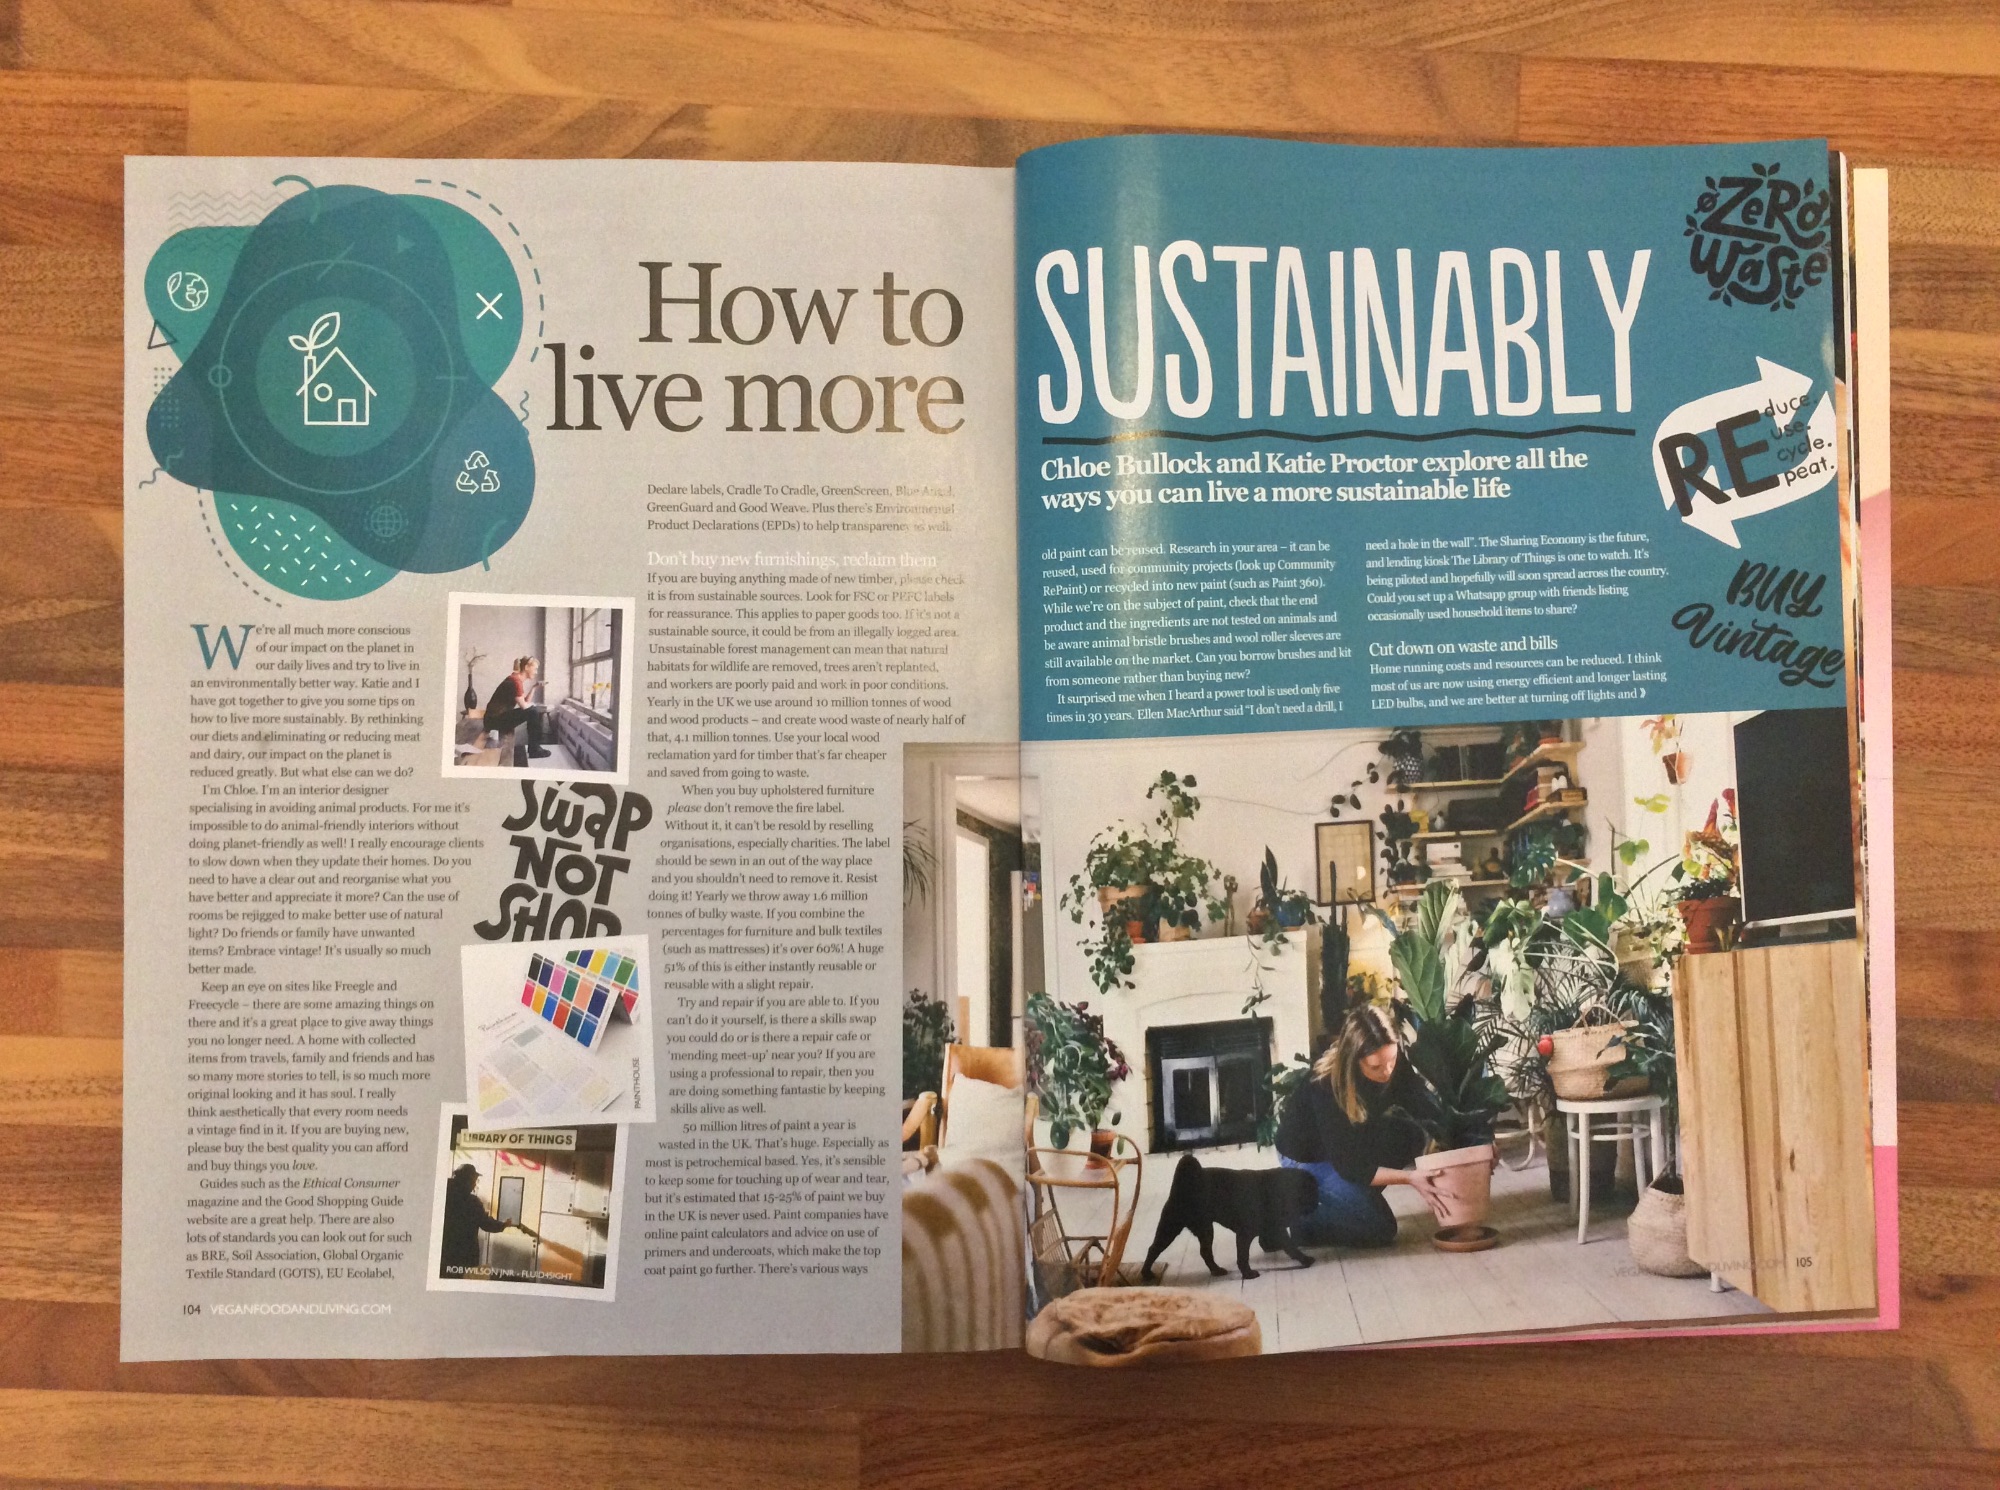 Vegan Food and Living magazine 'How to live more sustainably' - March 2020